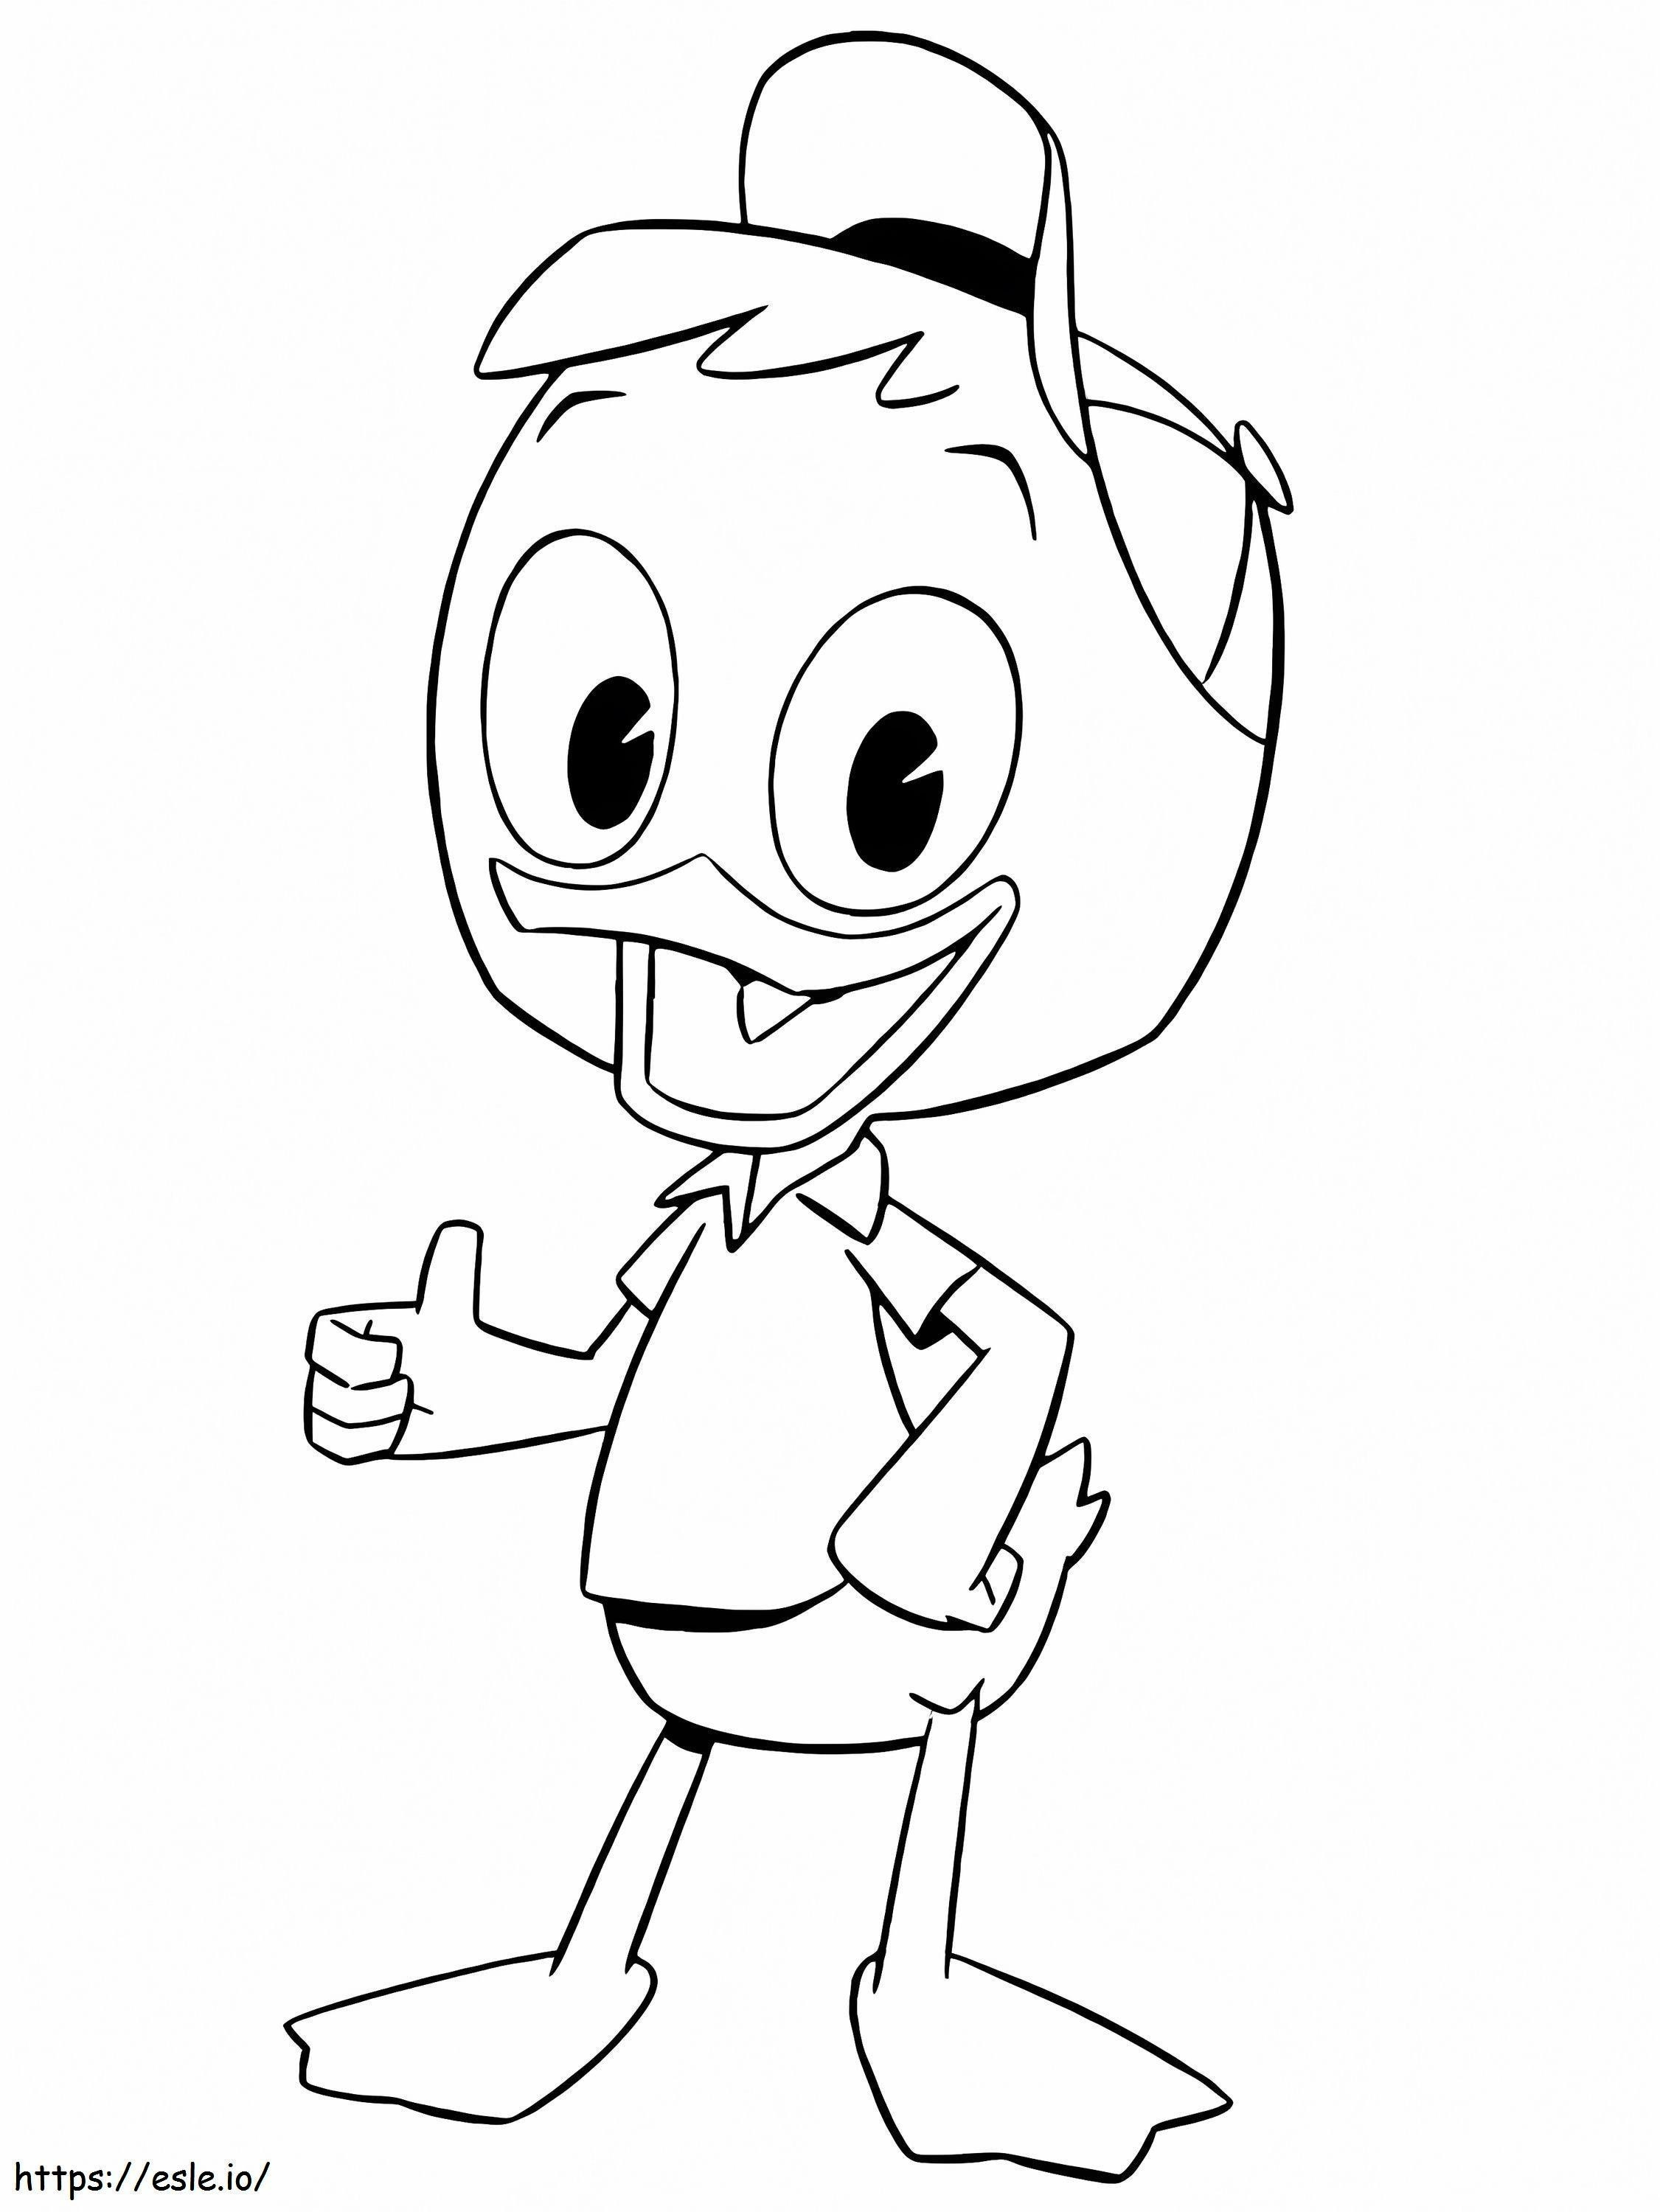 Huey Duck From Ducktales coloring page